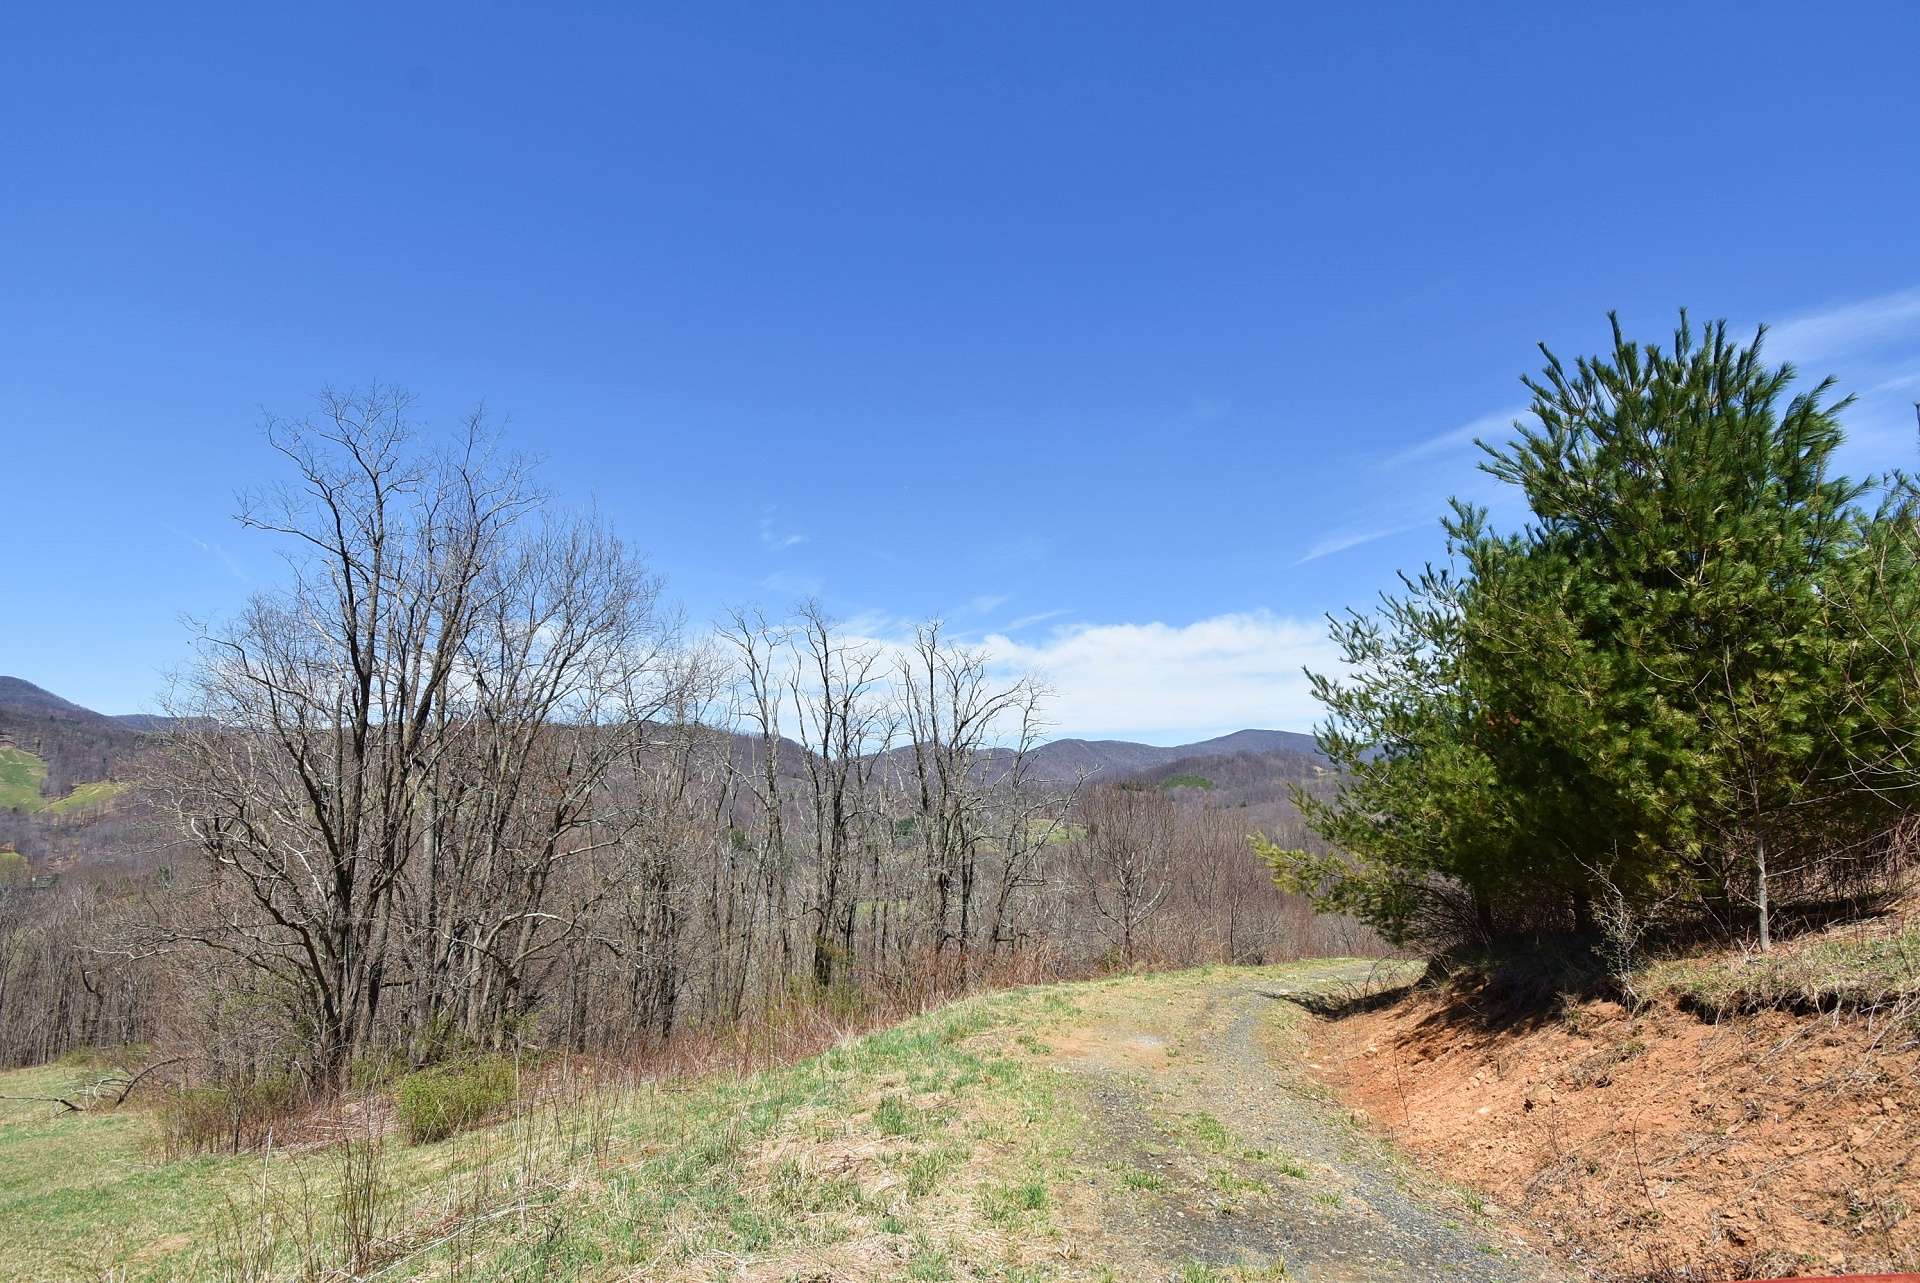 A graveled drive winds through the acreage along beautiful ridges and woodlands.